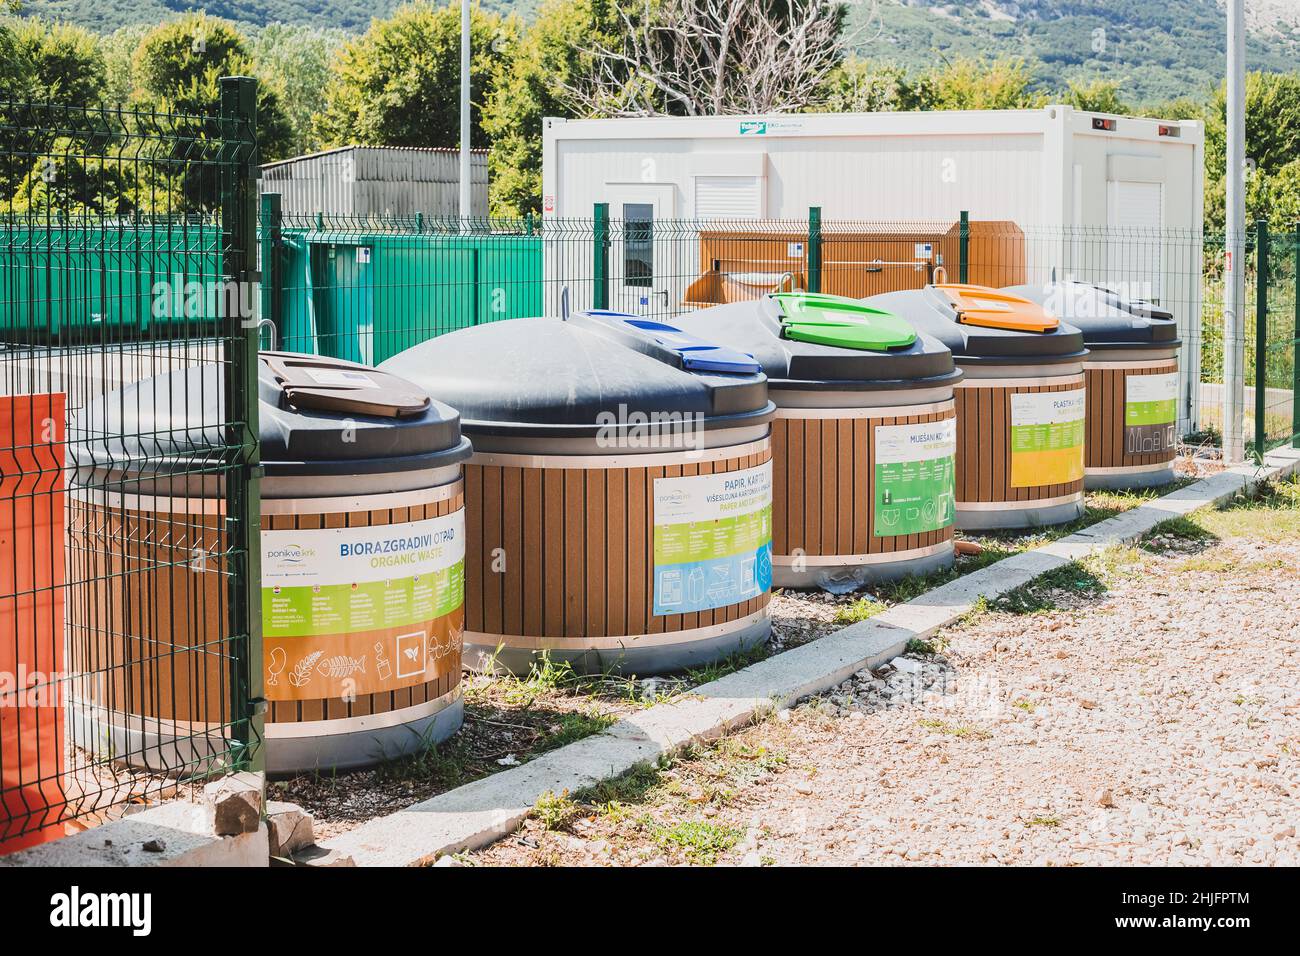 Krk, Croatia - 24 August, 2021: Containers with different types of waste at city waste sorting centre Stock Photo